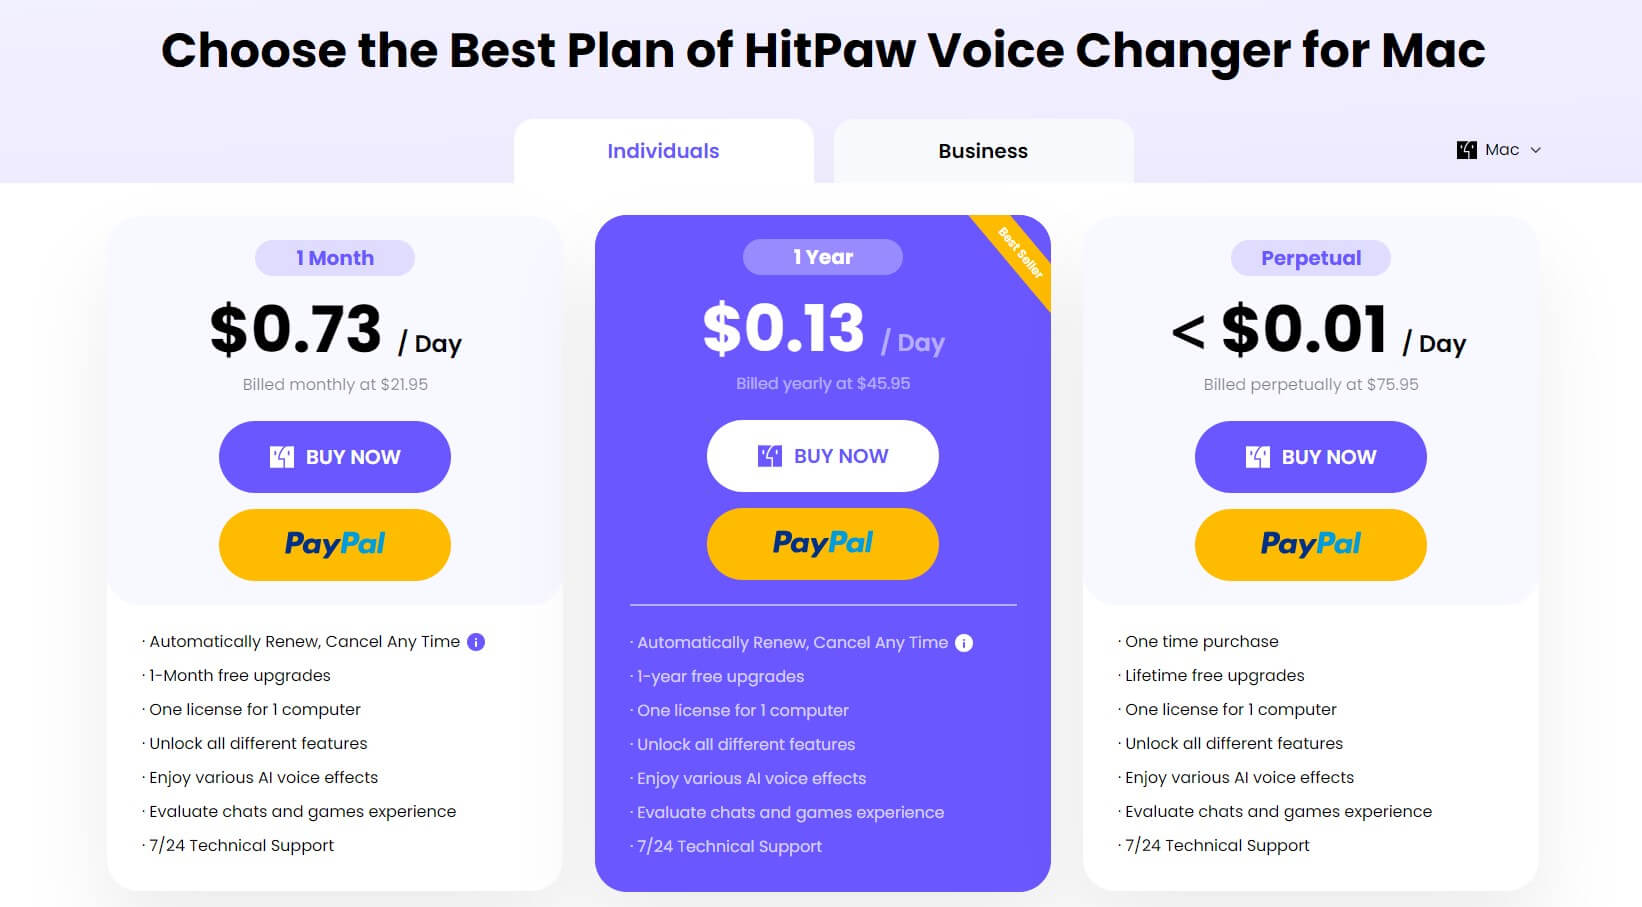 hitpaw voice changer pricing